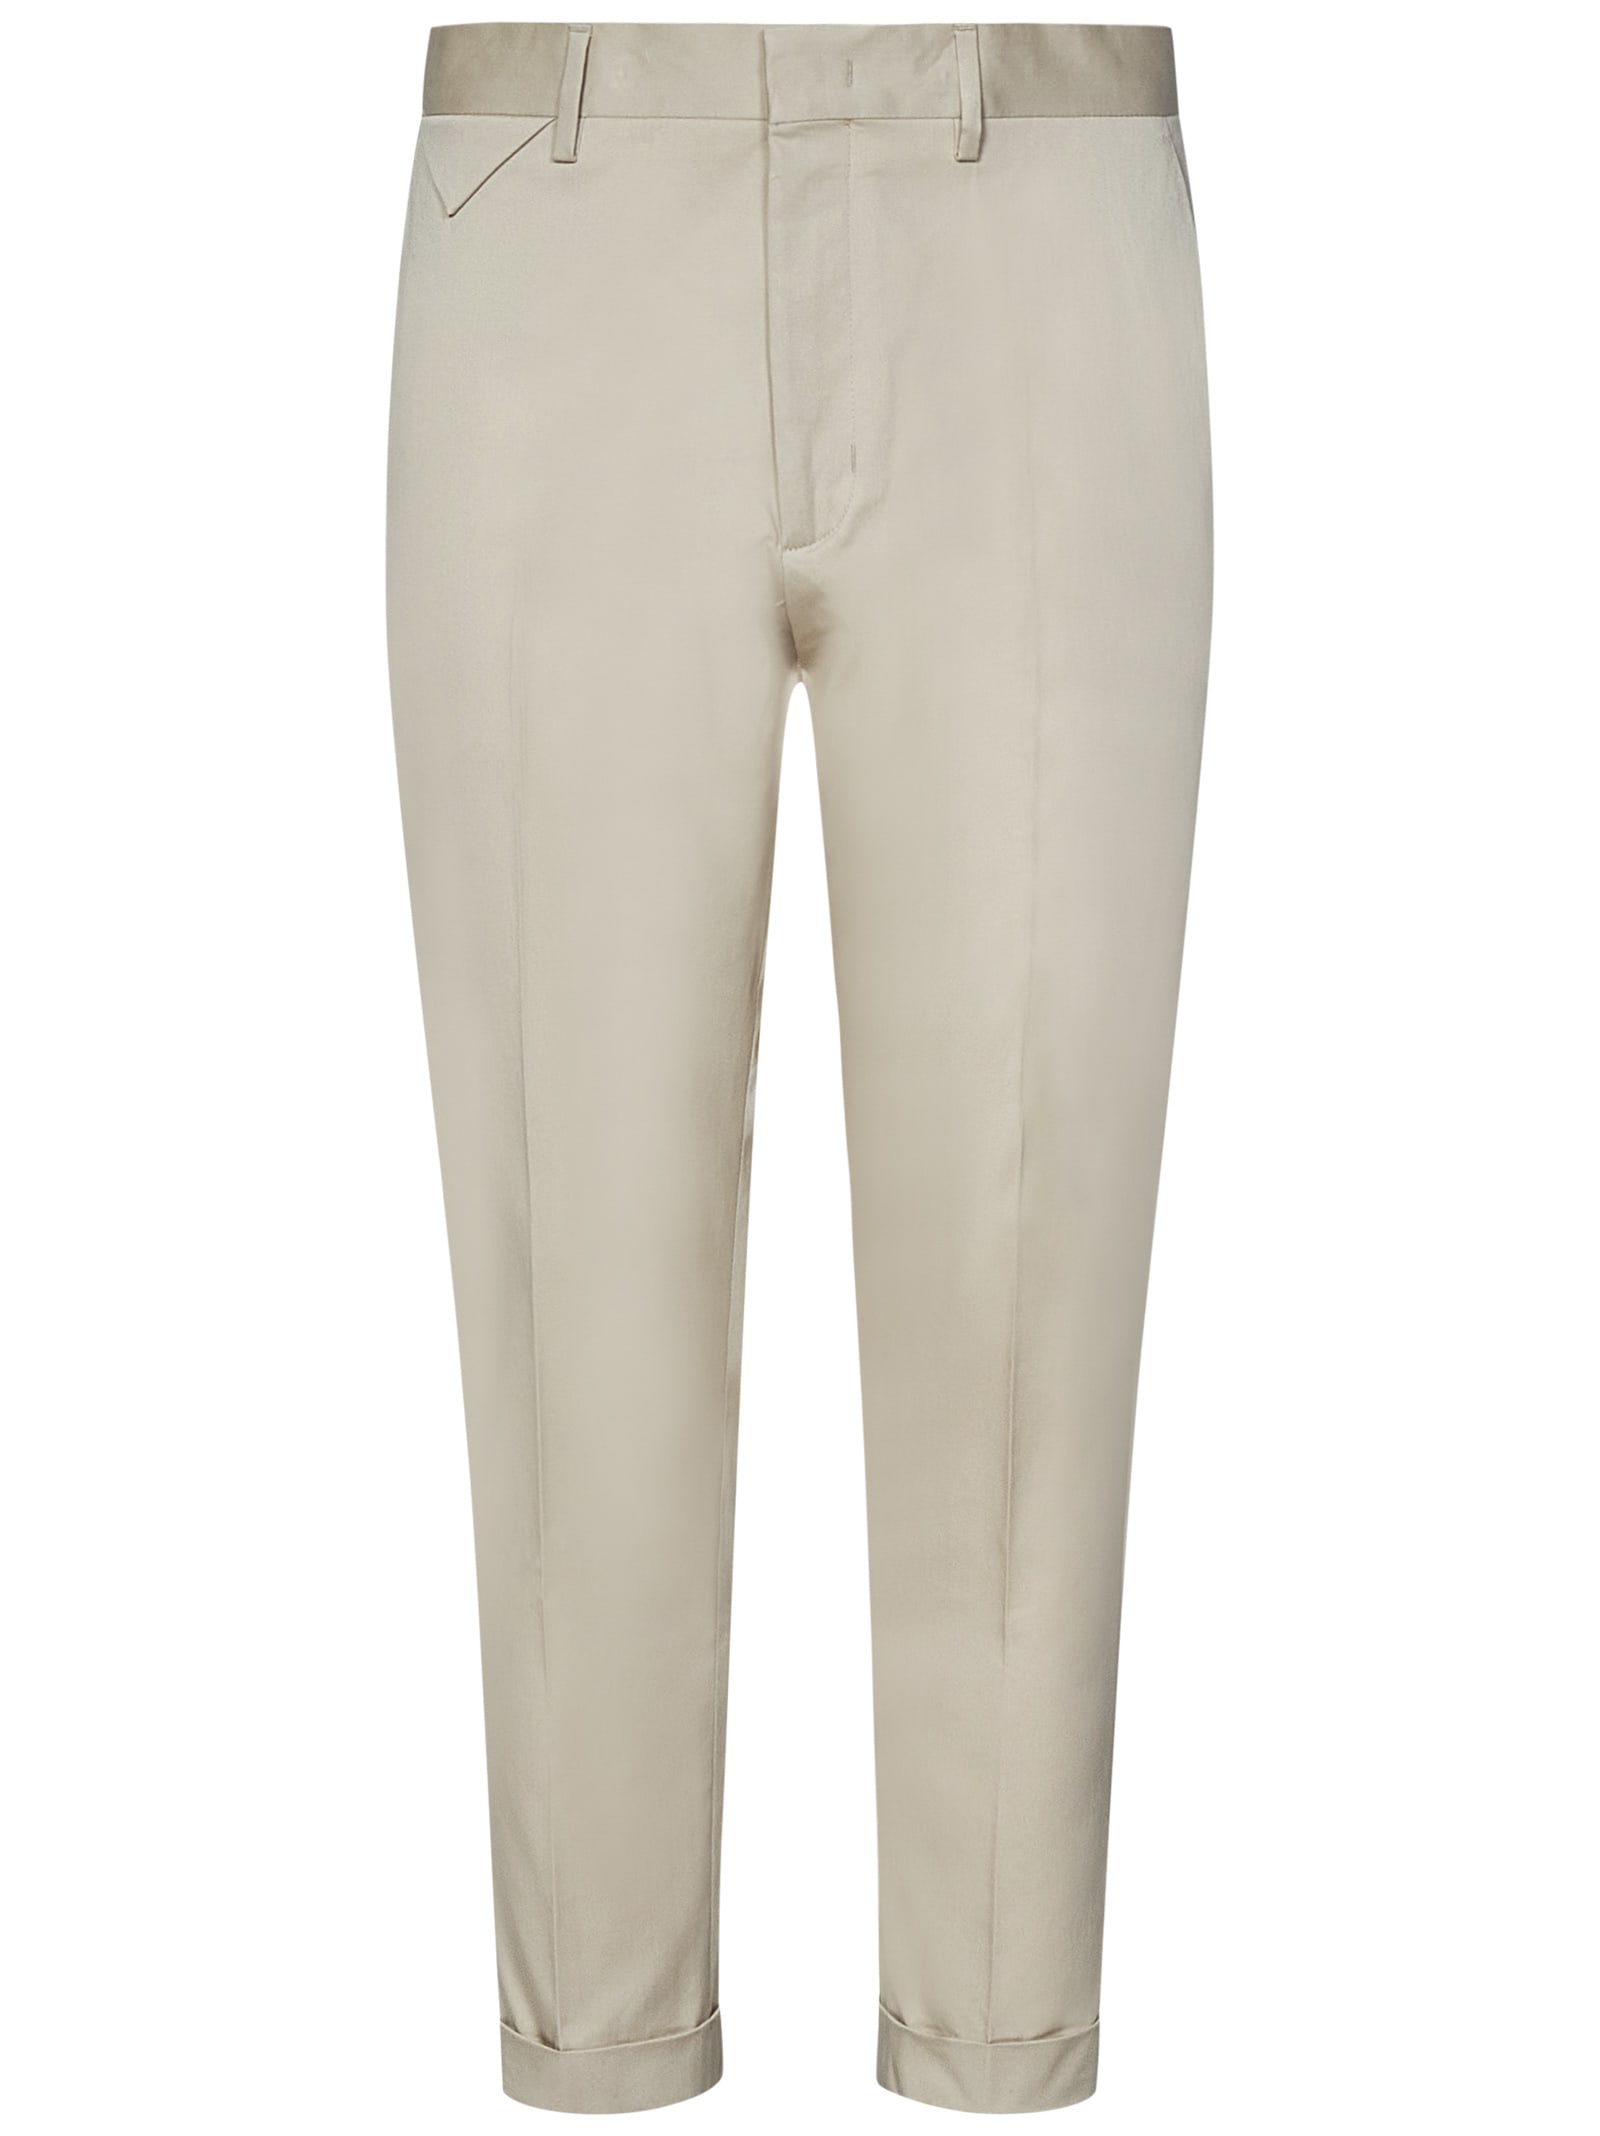 Cooper T1.7 Trousers